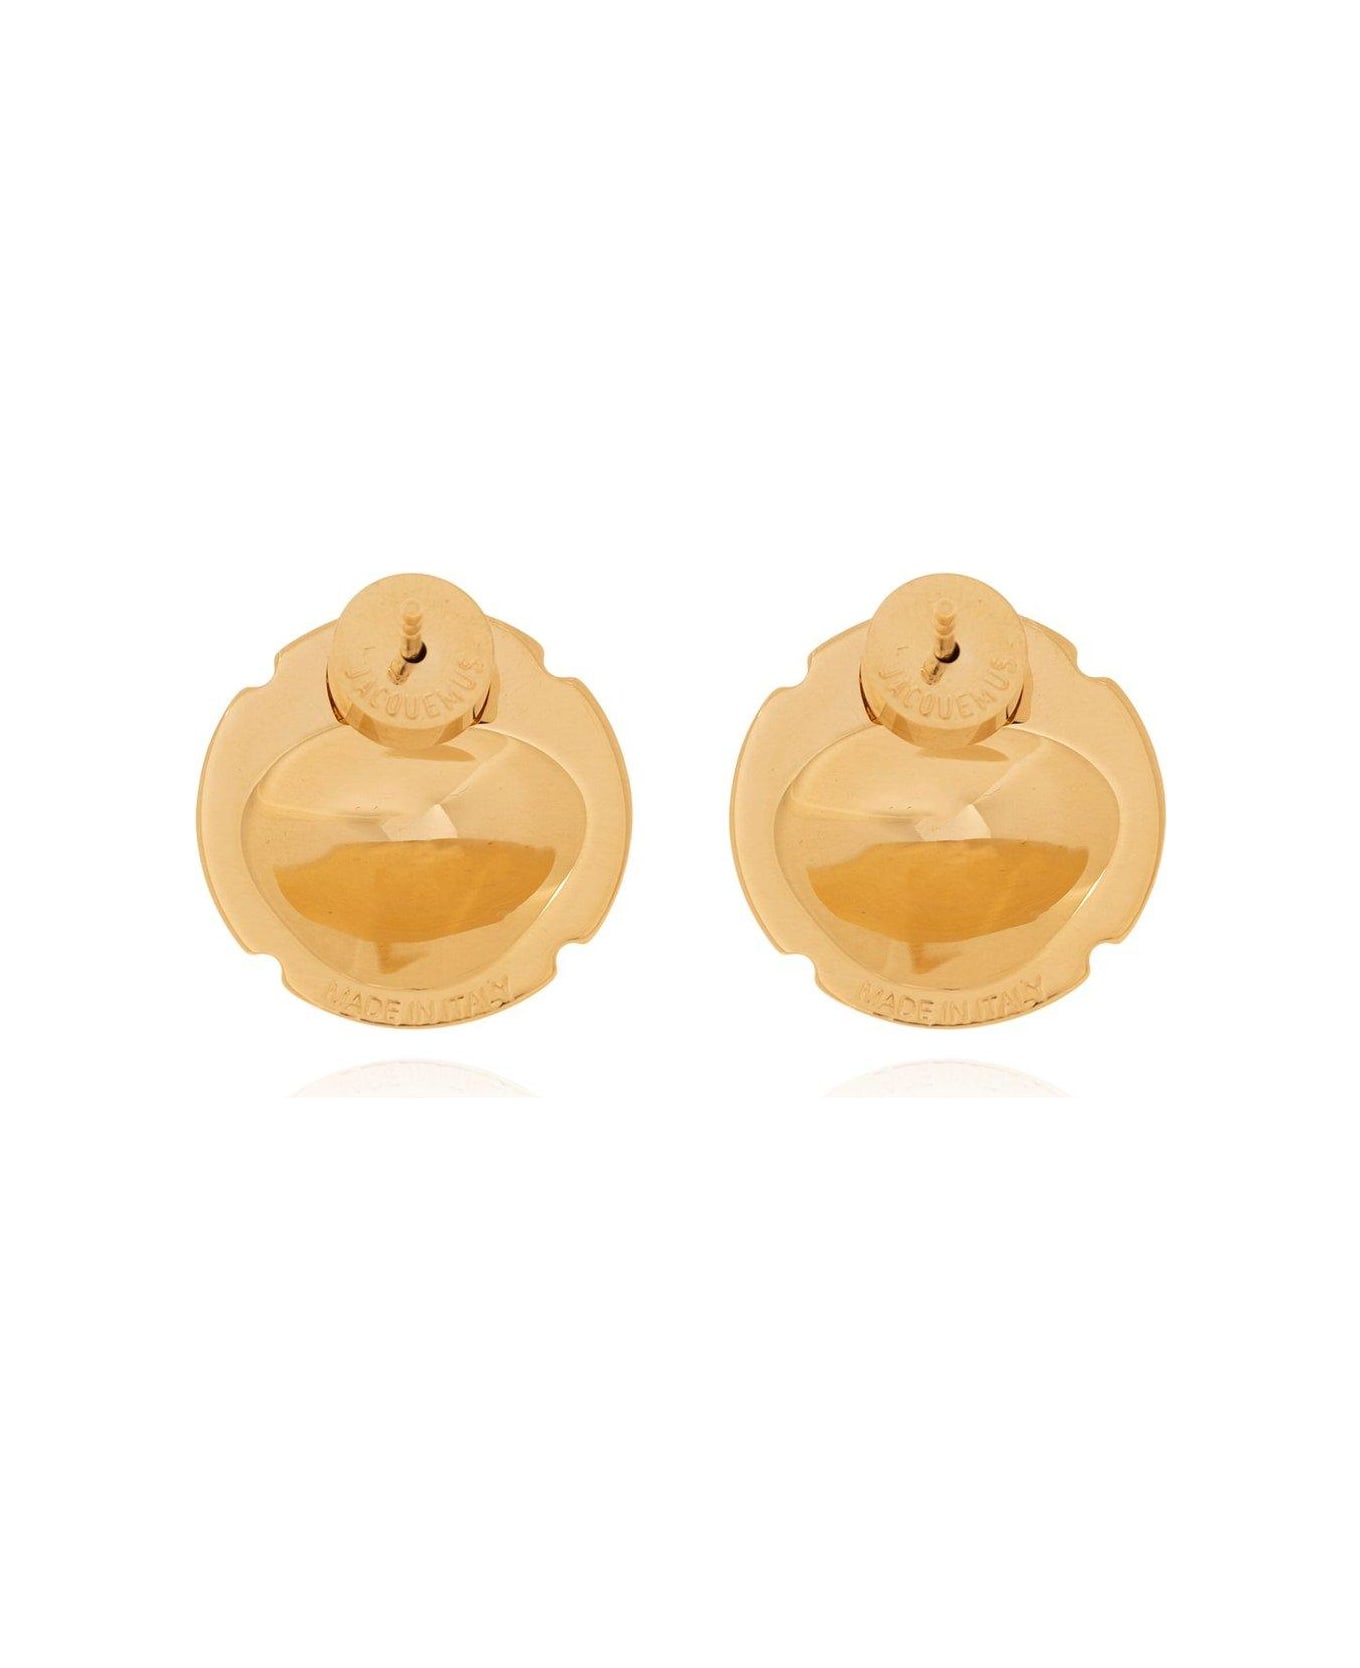 Jacquemus Champagne Muselet Earrings - Light Gold イヤリング